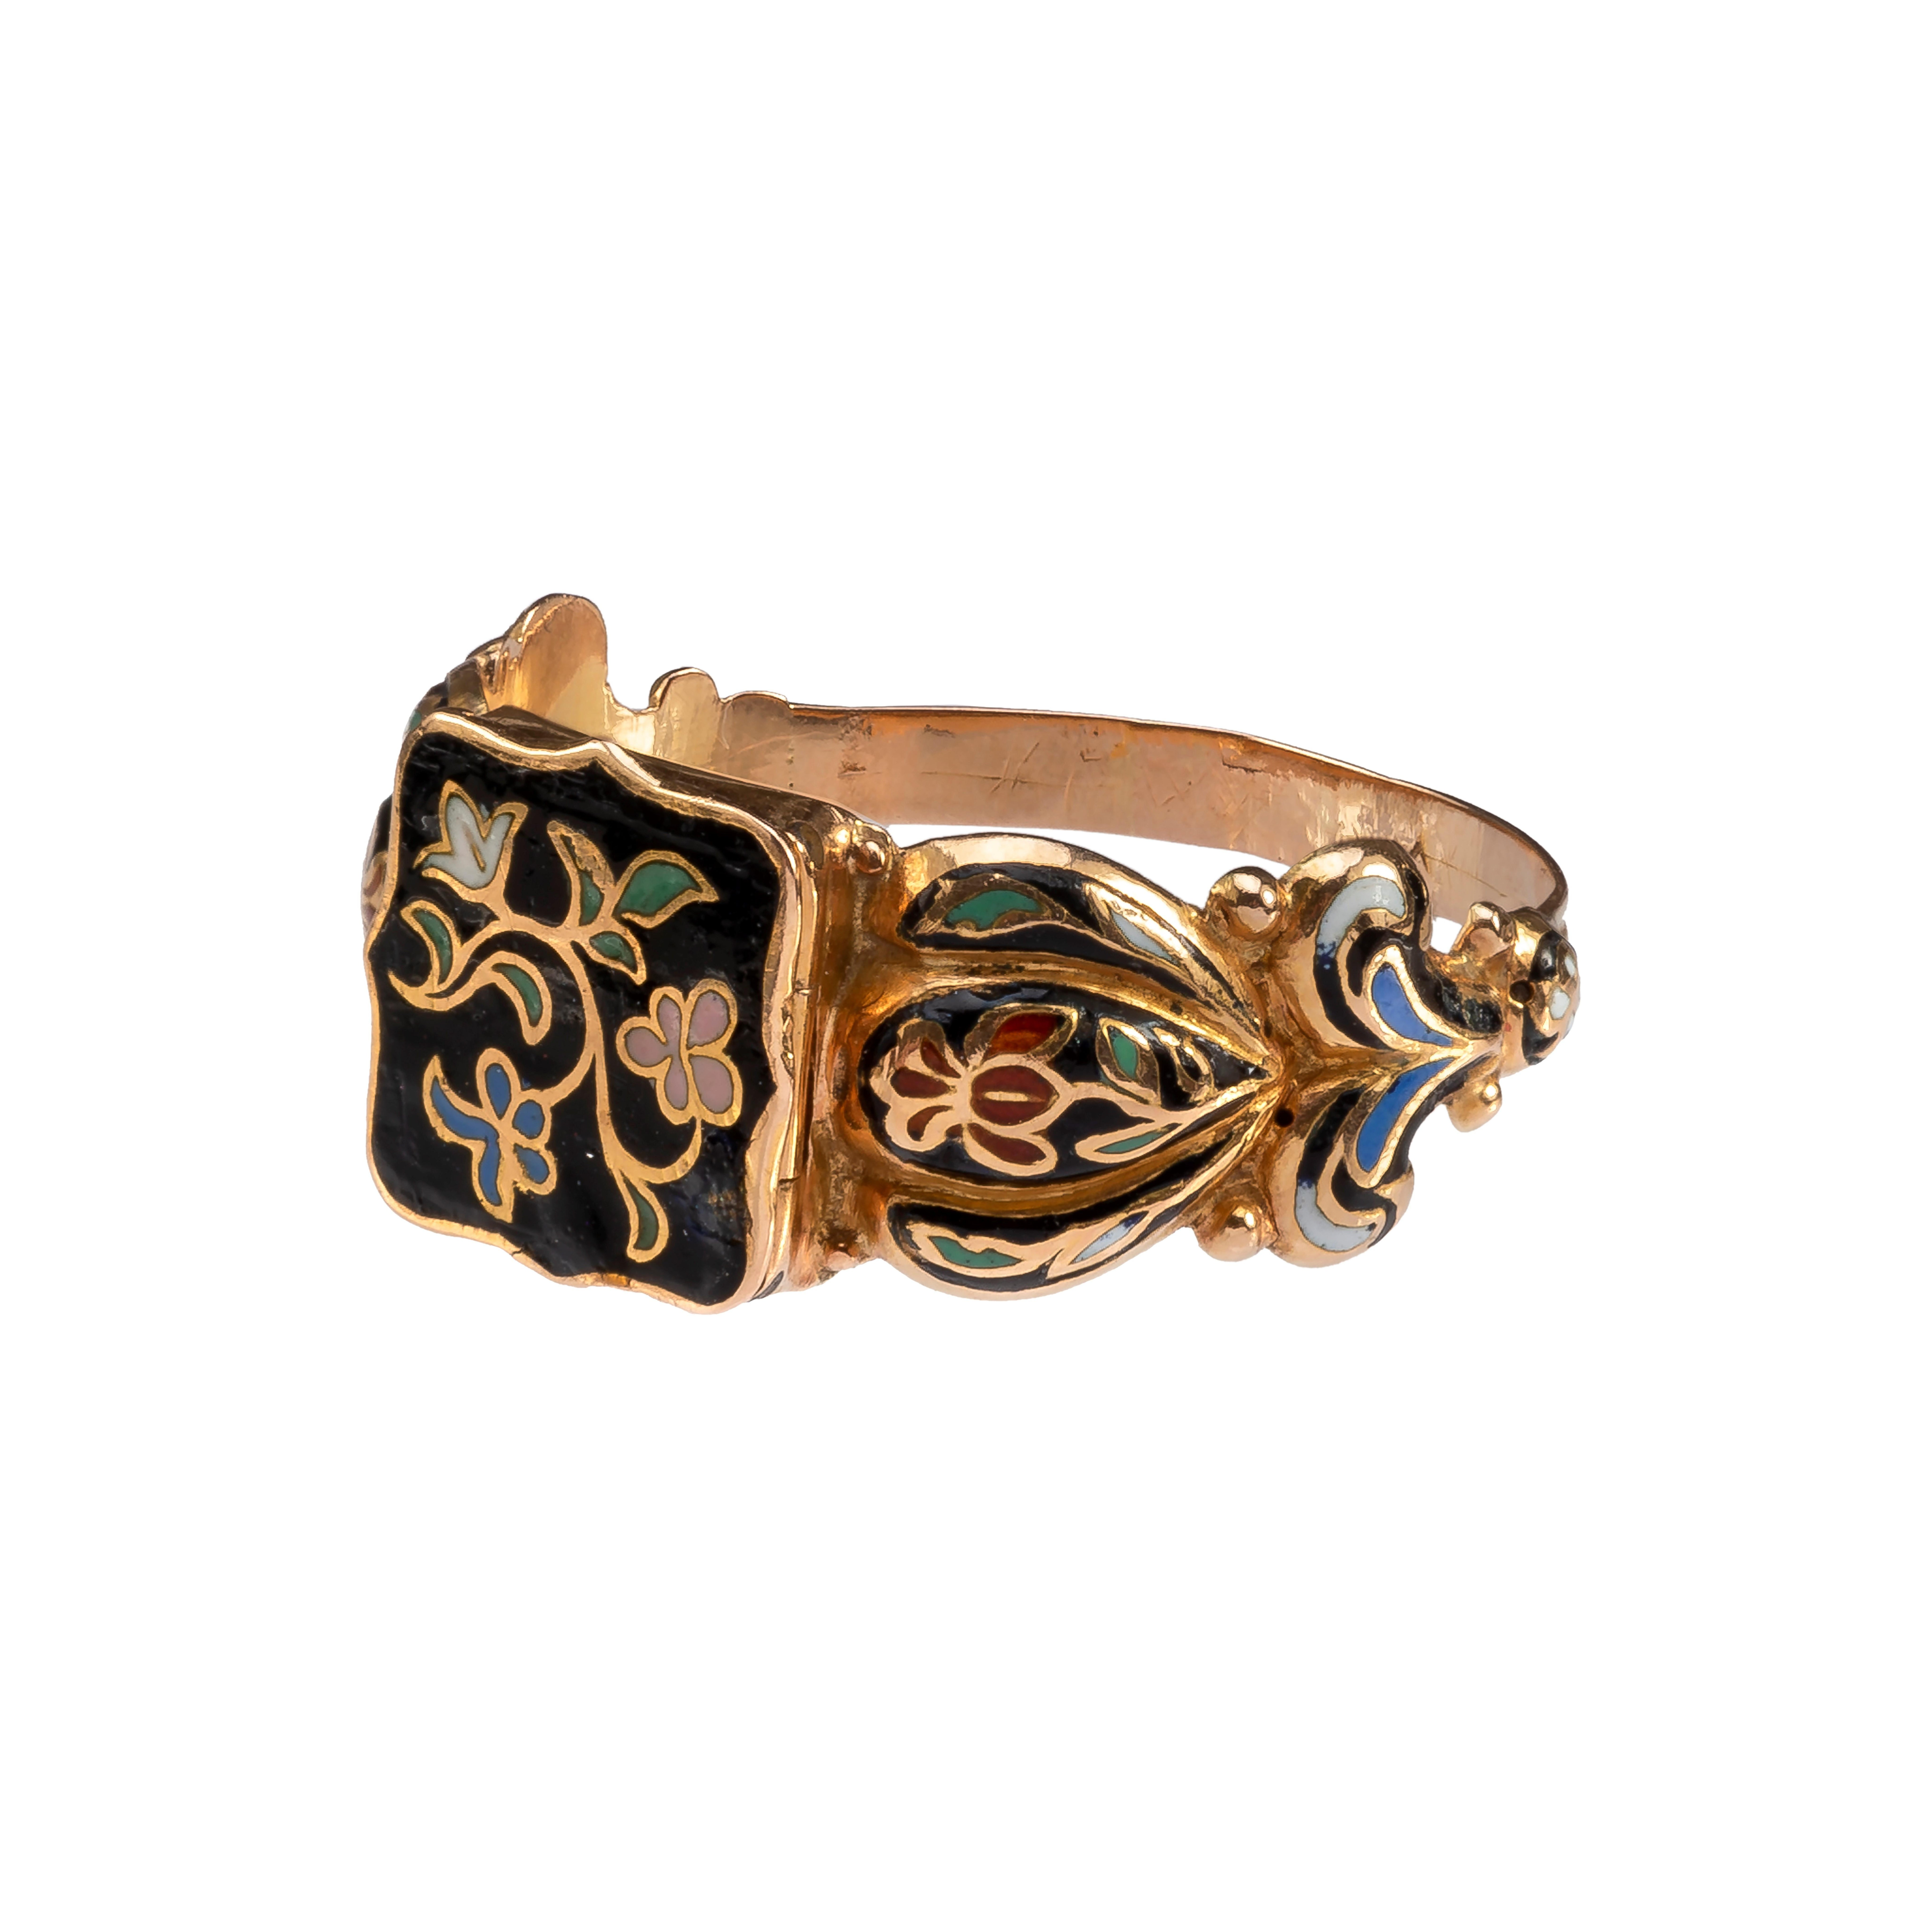 Enameled Ring with Flowers
France, c. 1835 
Gold, enamel
Weight 2 gr.; circumference 57.65 mm.; US size 8 ¼ ; UK size Q ½ 

Charming enamel ring, with a concealed compartment for keepsakes and brimming with expressions of love.

Gold ring with lower